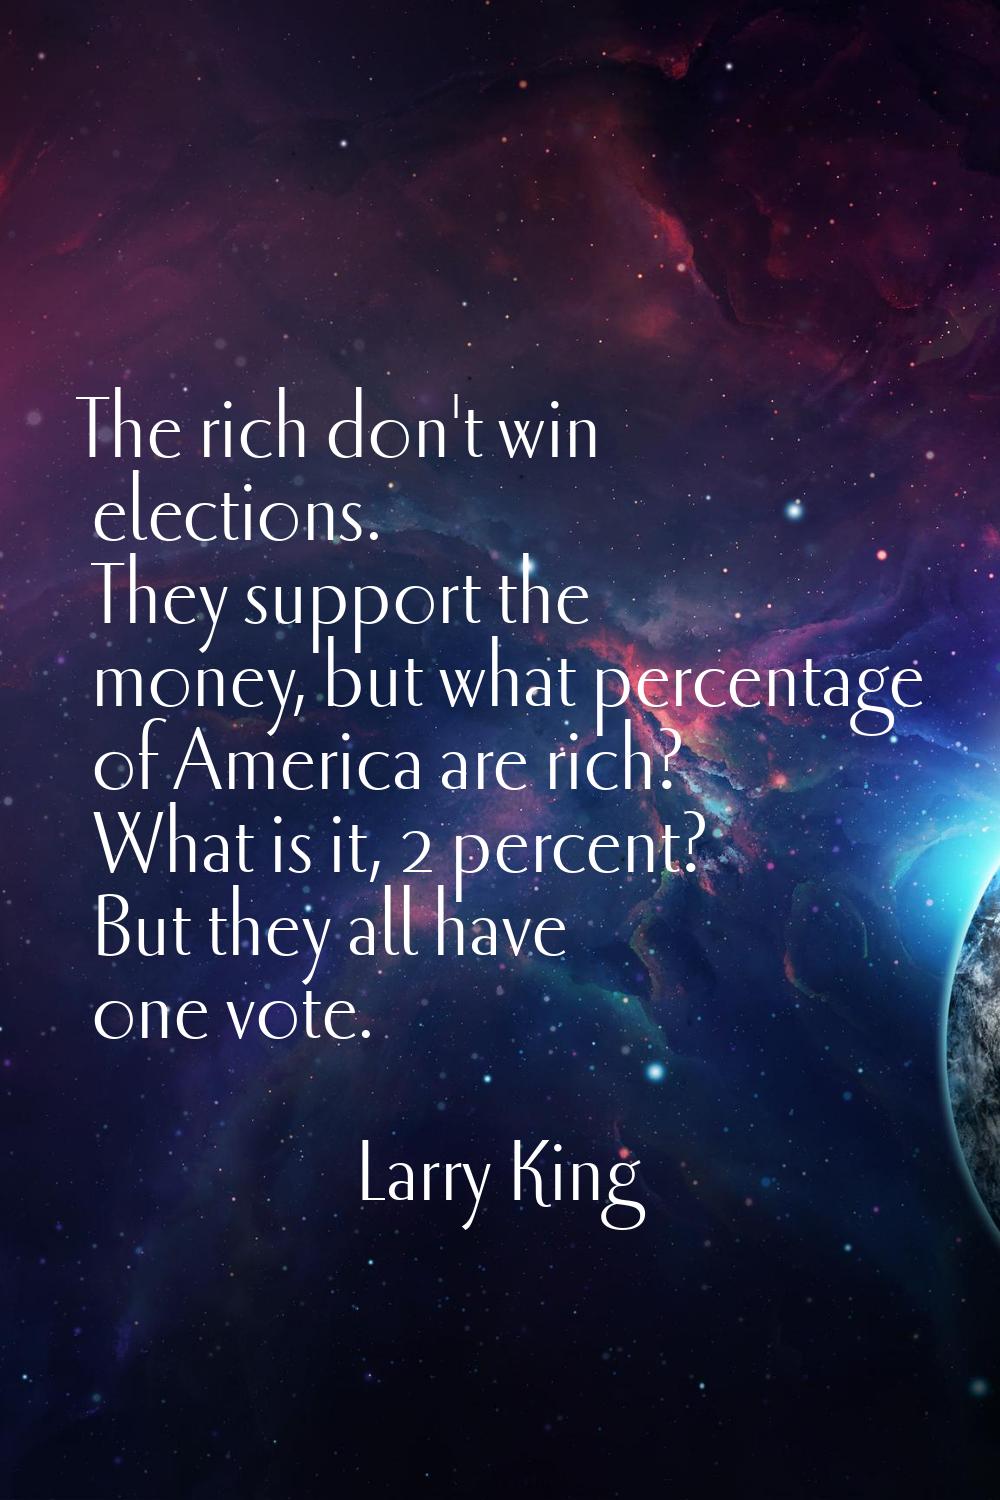 The rich don't win elections. They support the money, but what percentage of America are rich? What